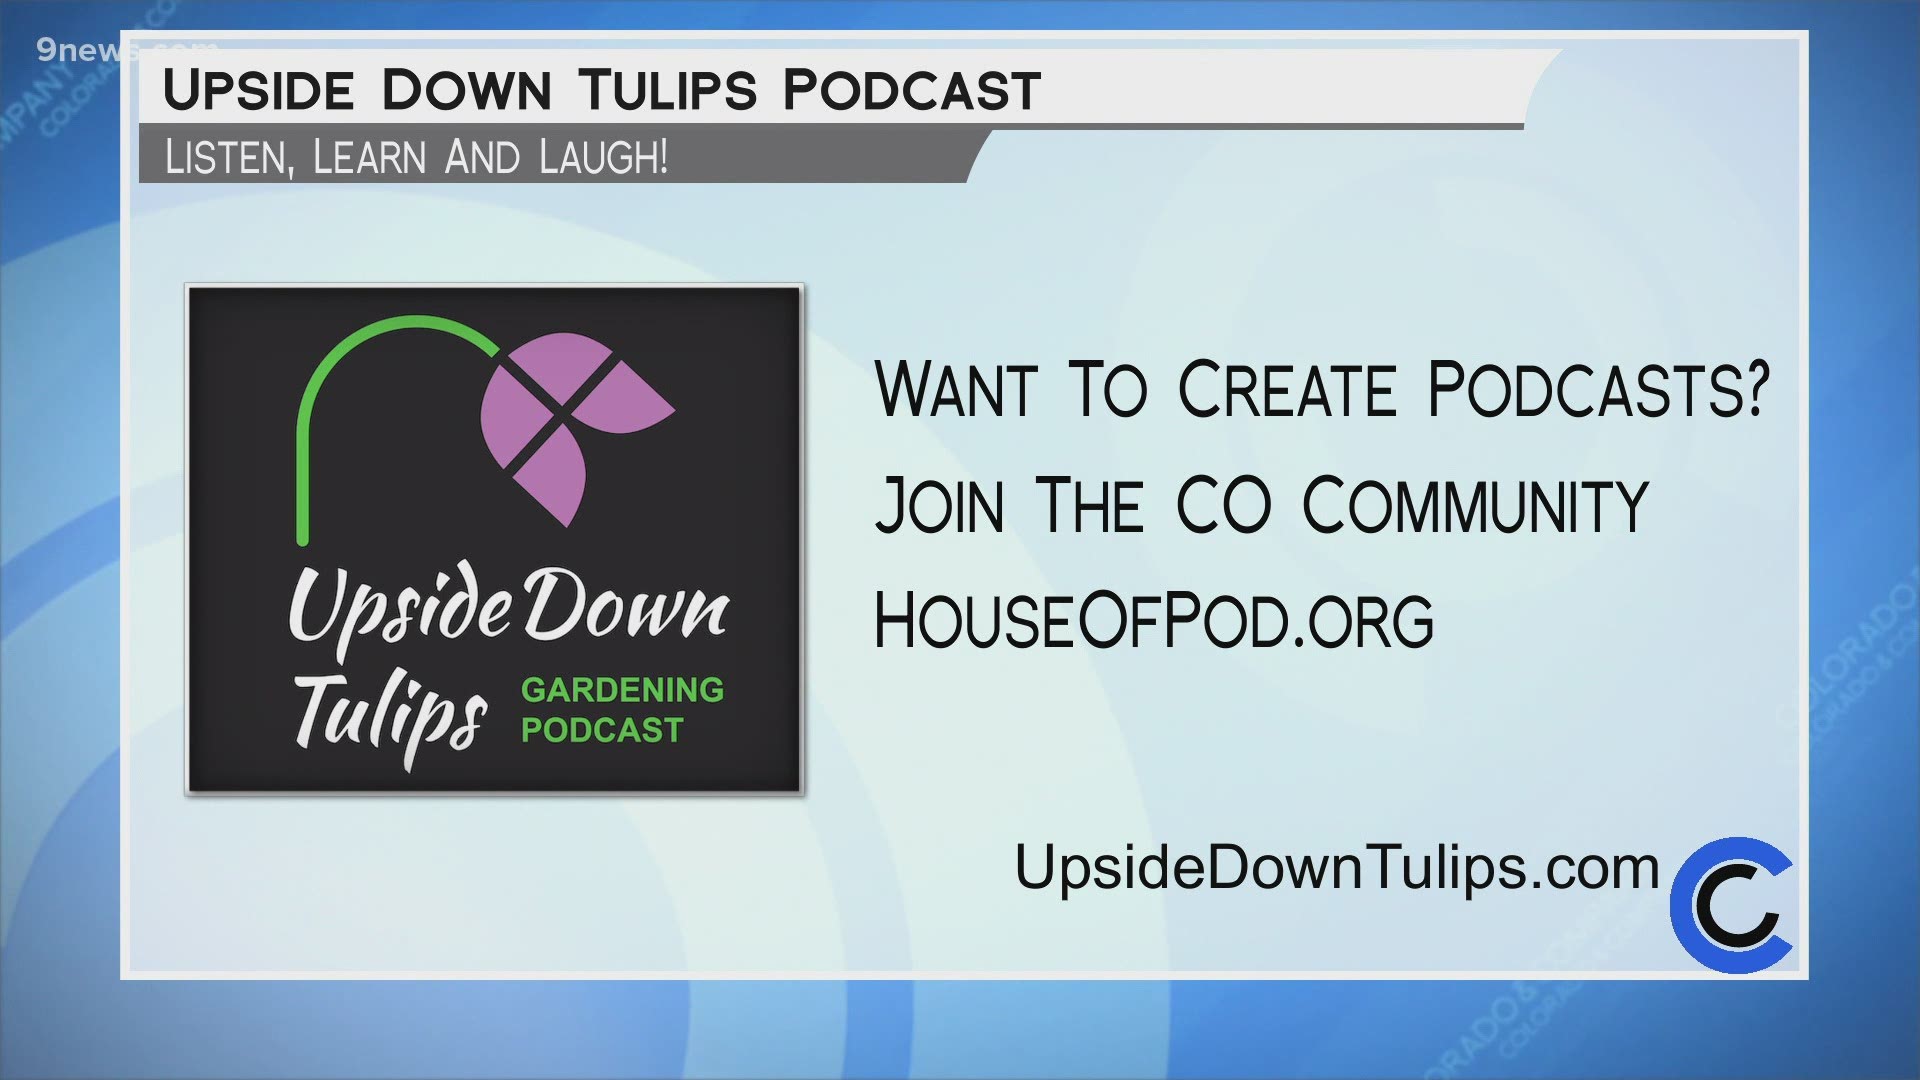 Get in the garden and learn with the Upside Down Tulips. Learn more about producing your own podcast at HouseOfPod.org.